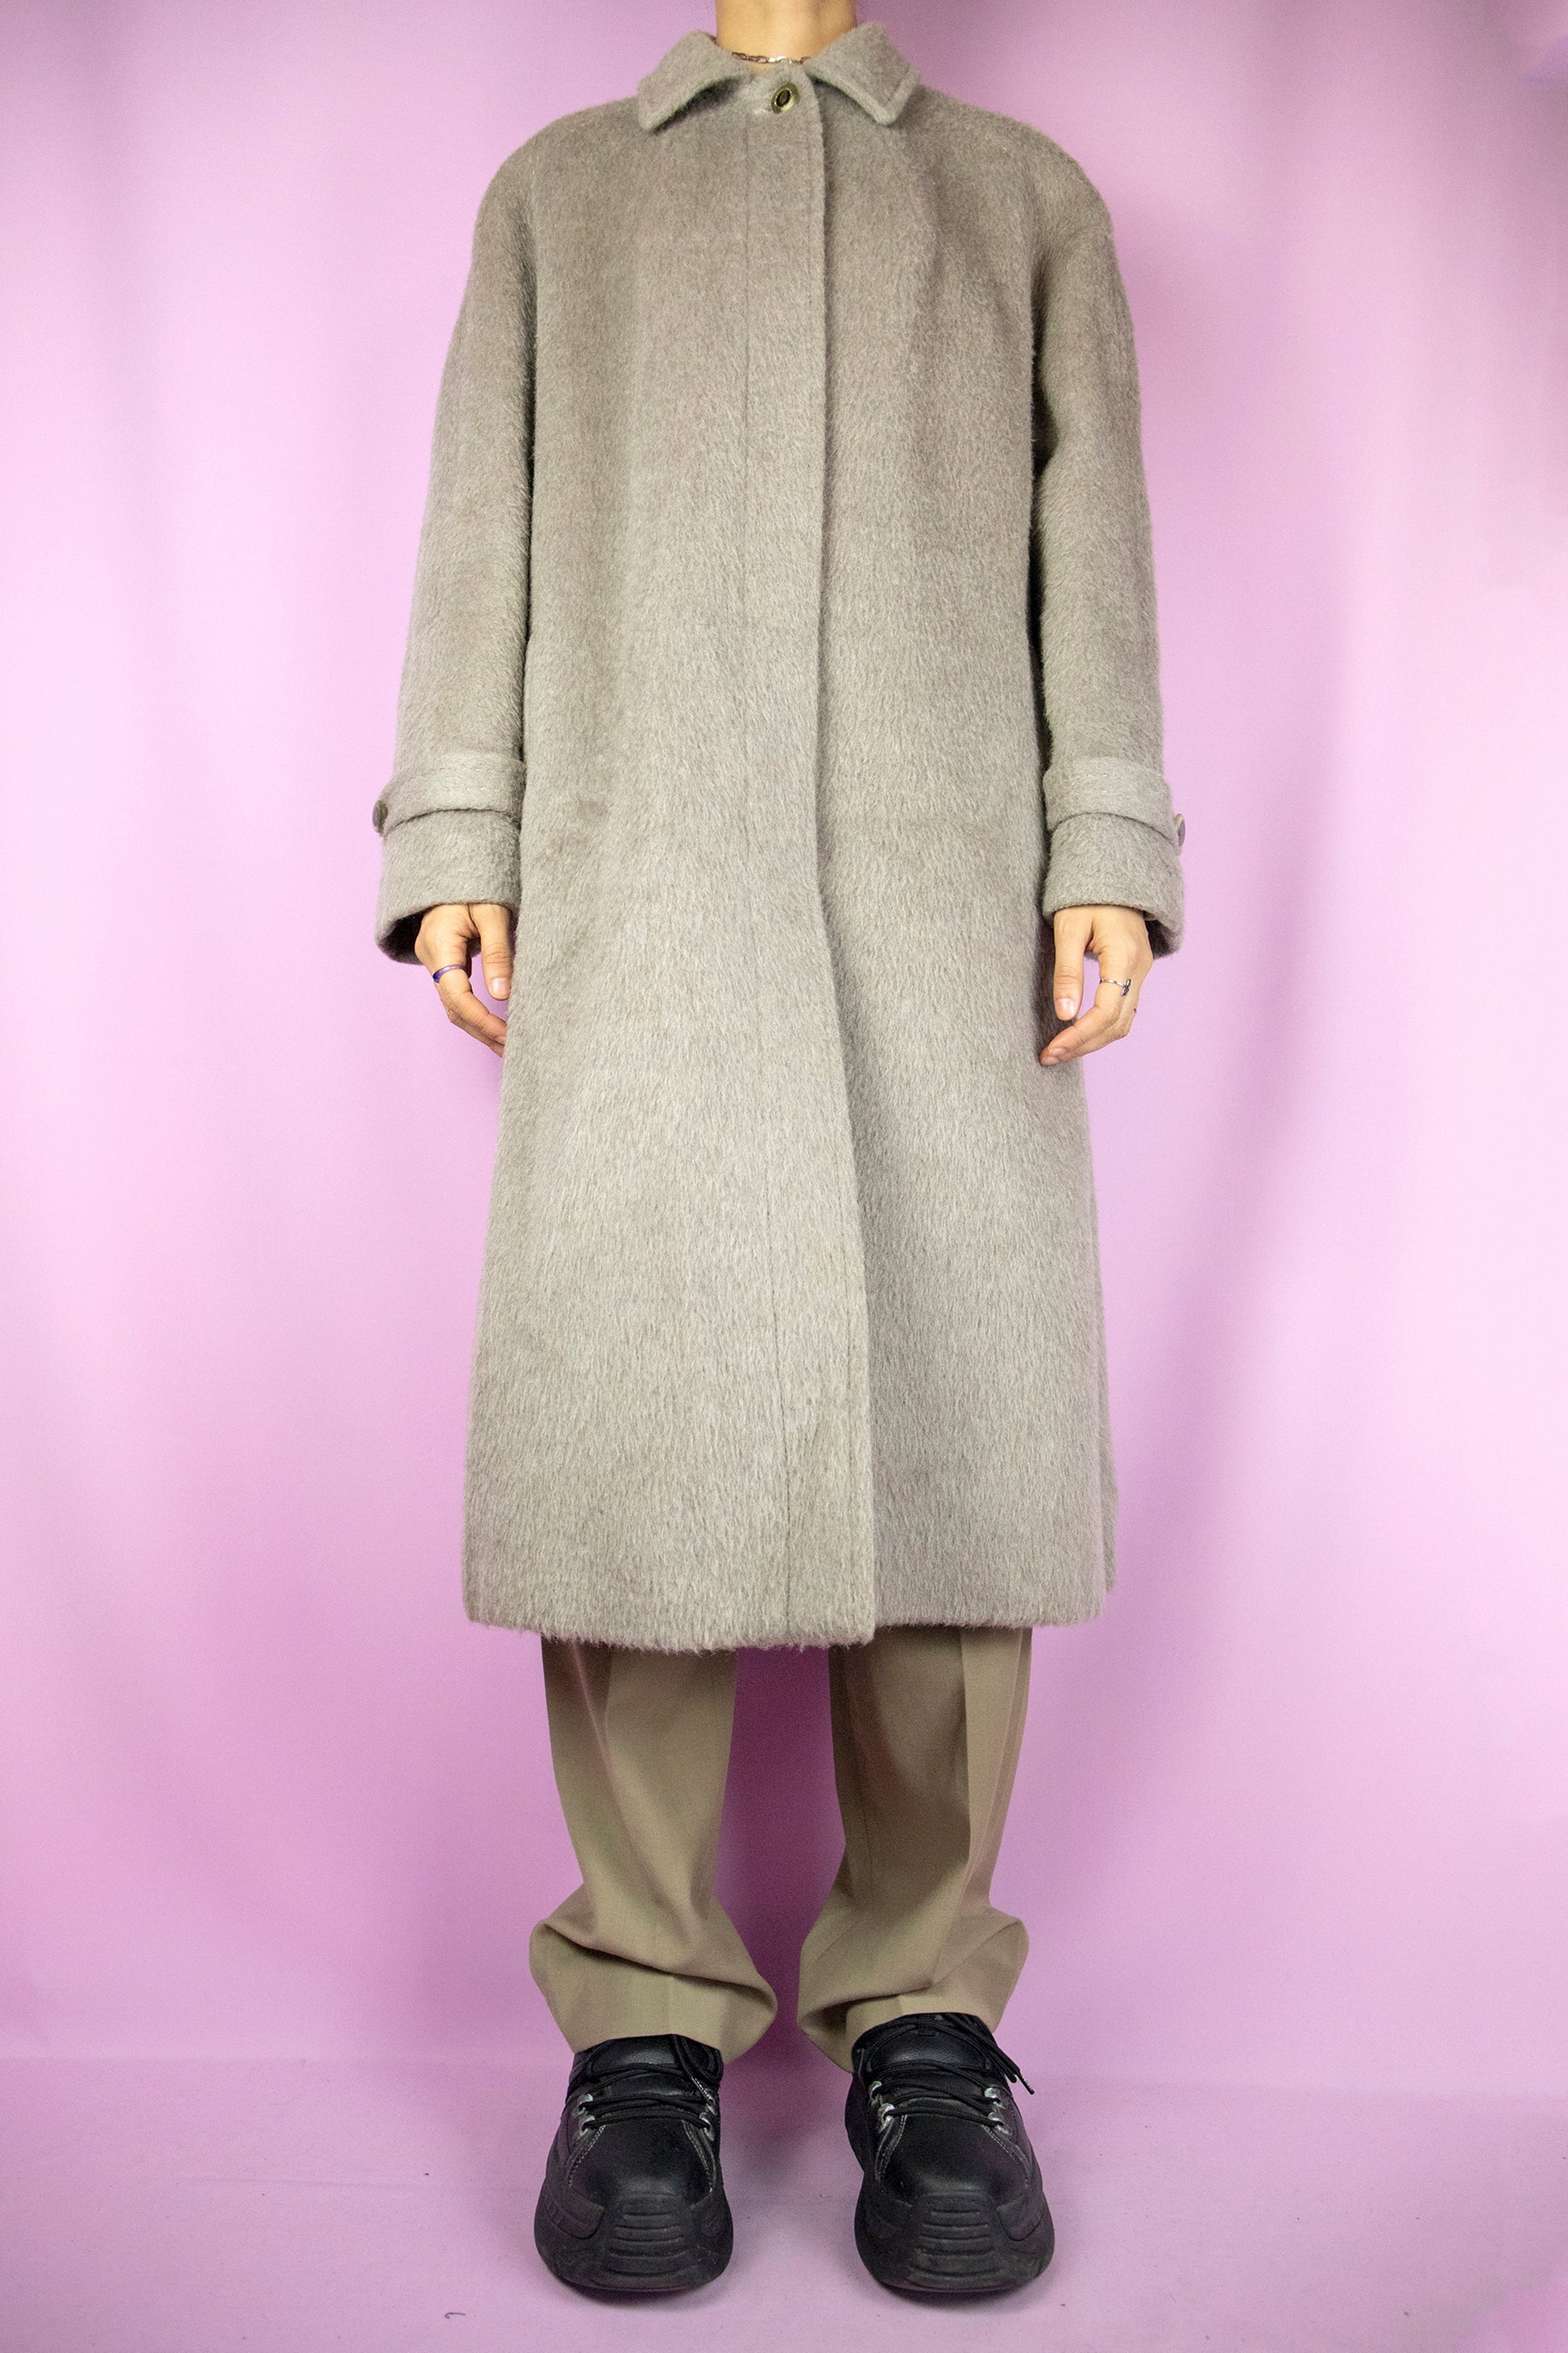 The Vintage 90s Beige Long Wool Coat is a light brown alpaca with merino wool blend maxi jacket with collar, buttons and pockets. Elegant classic retro 1990s winter statement coat.